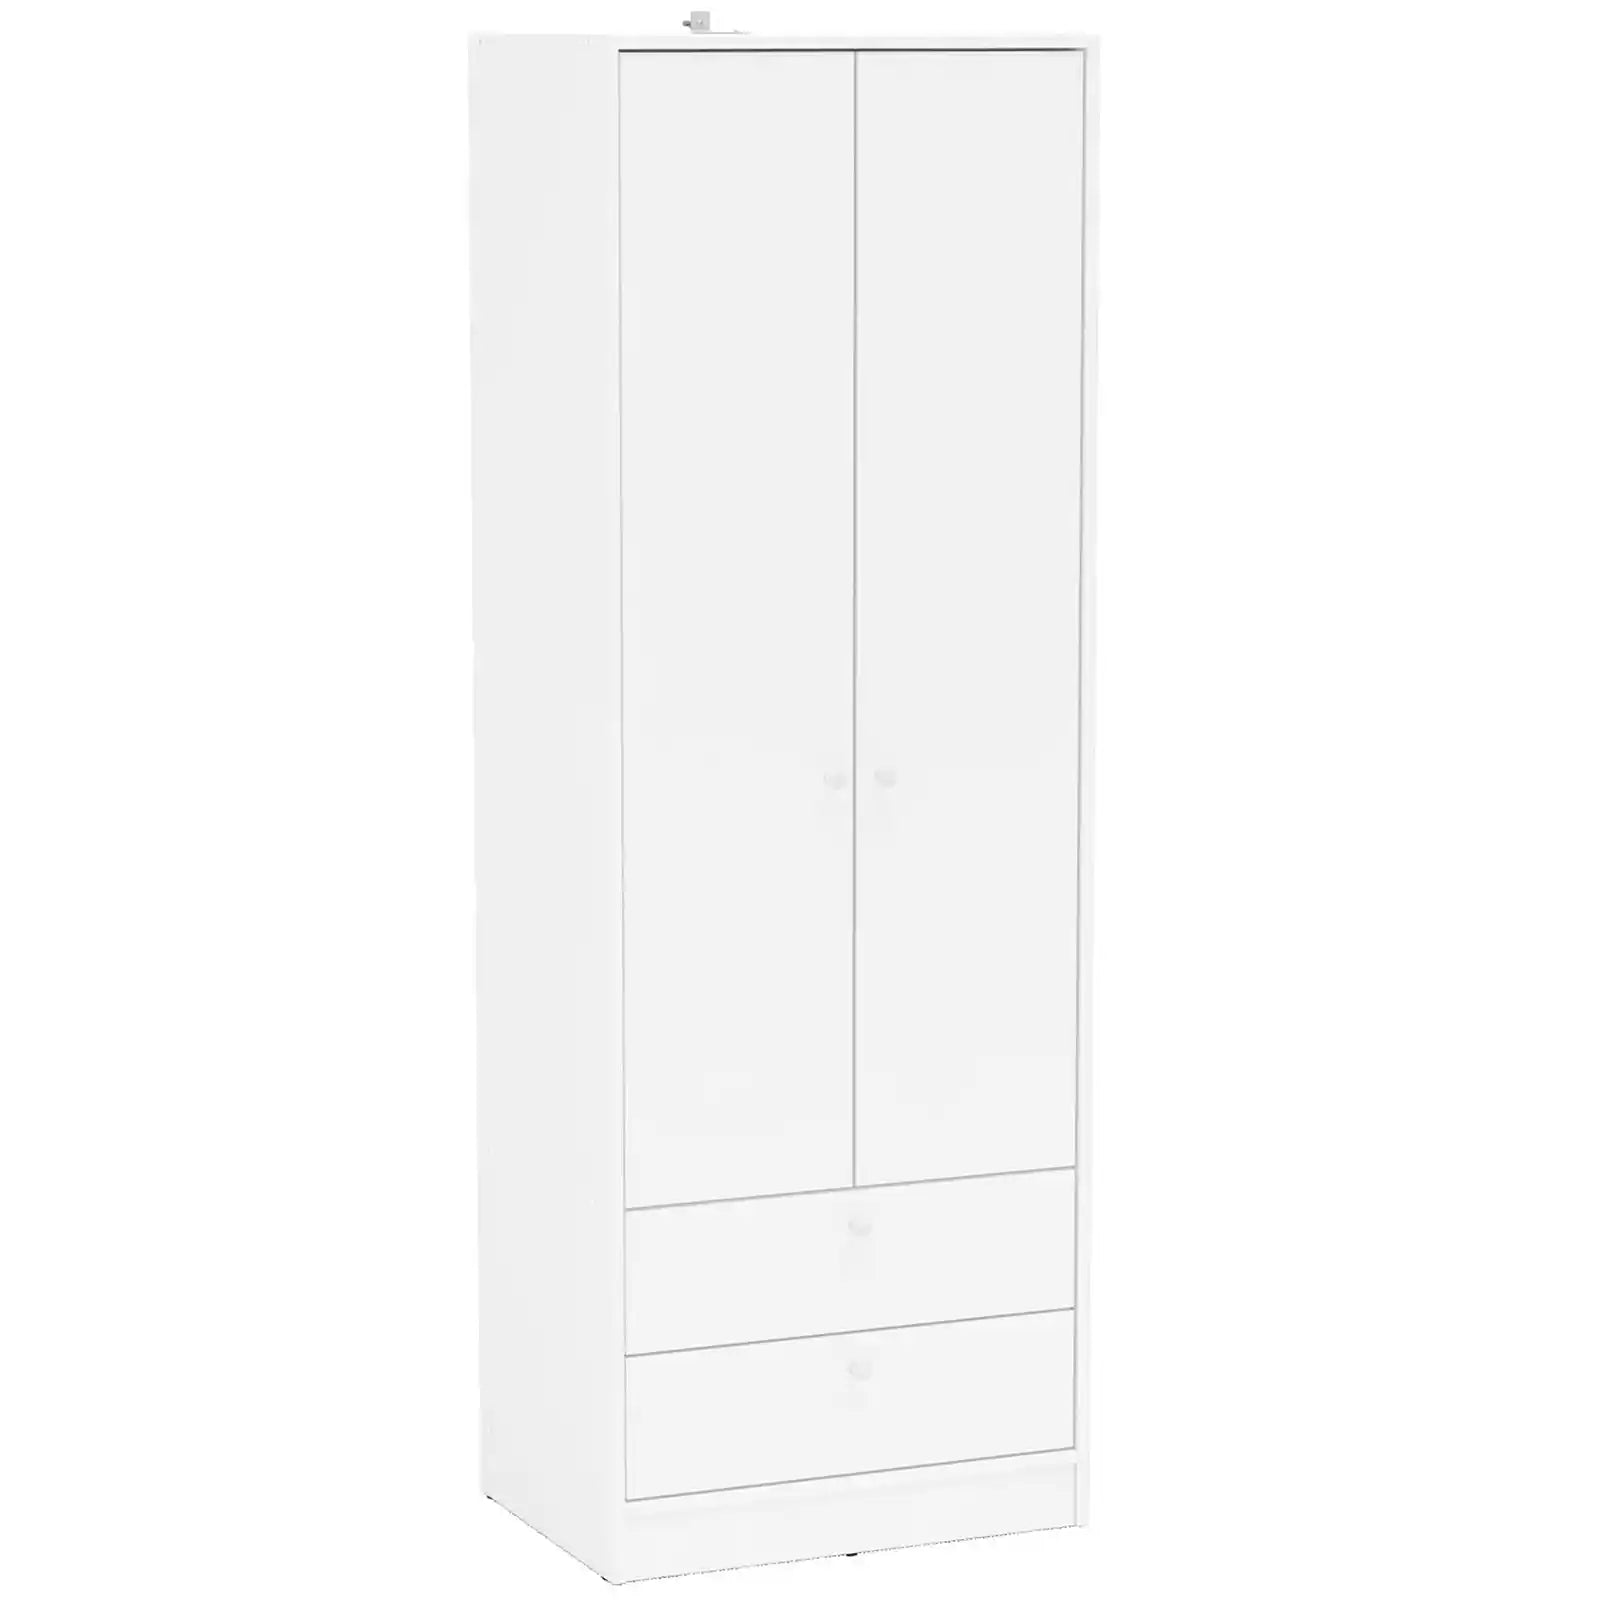 Organize Your Bedroom with a 2-Door/2-Drawer Armoire | Stylish White Finish | Durable Construction